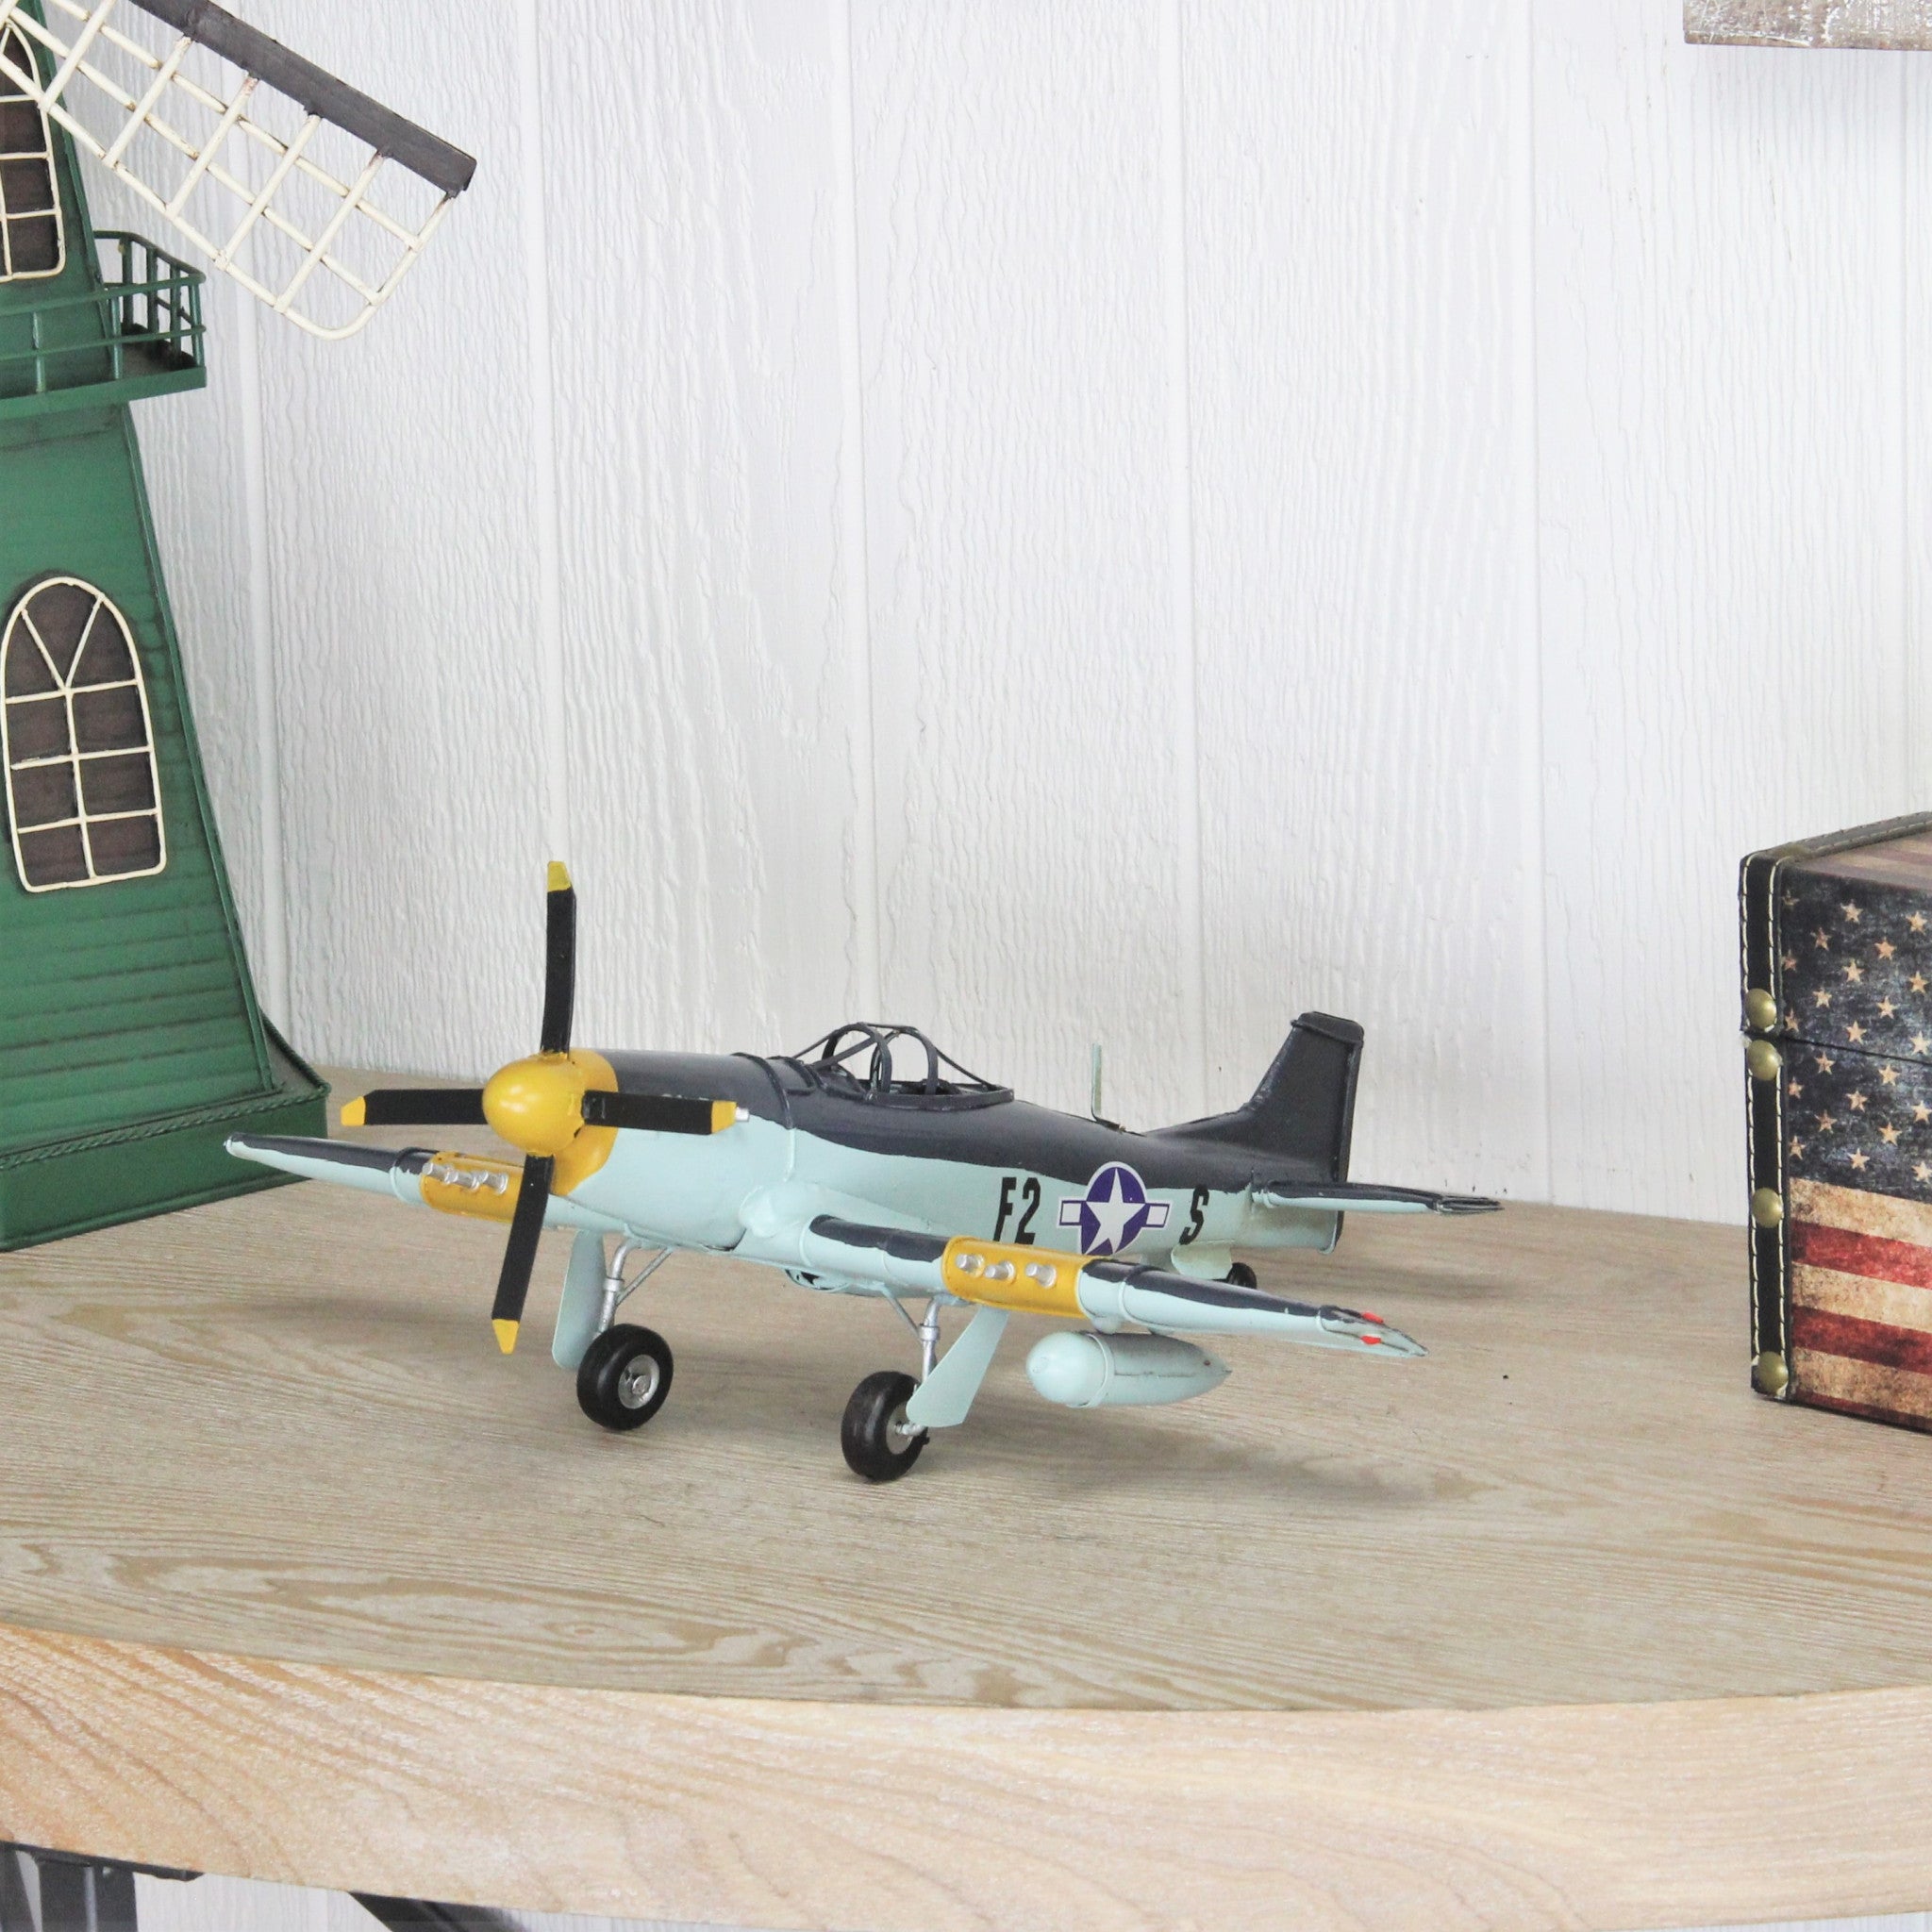 5" Black and Yellow Metal Hand Painted Model Airplane